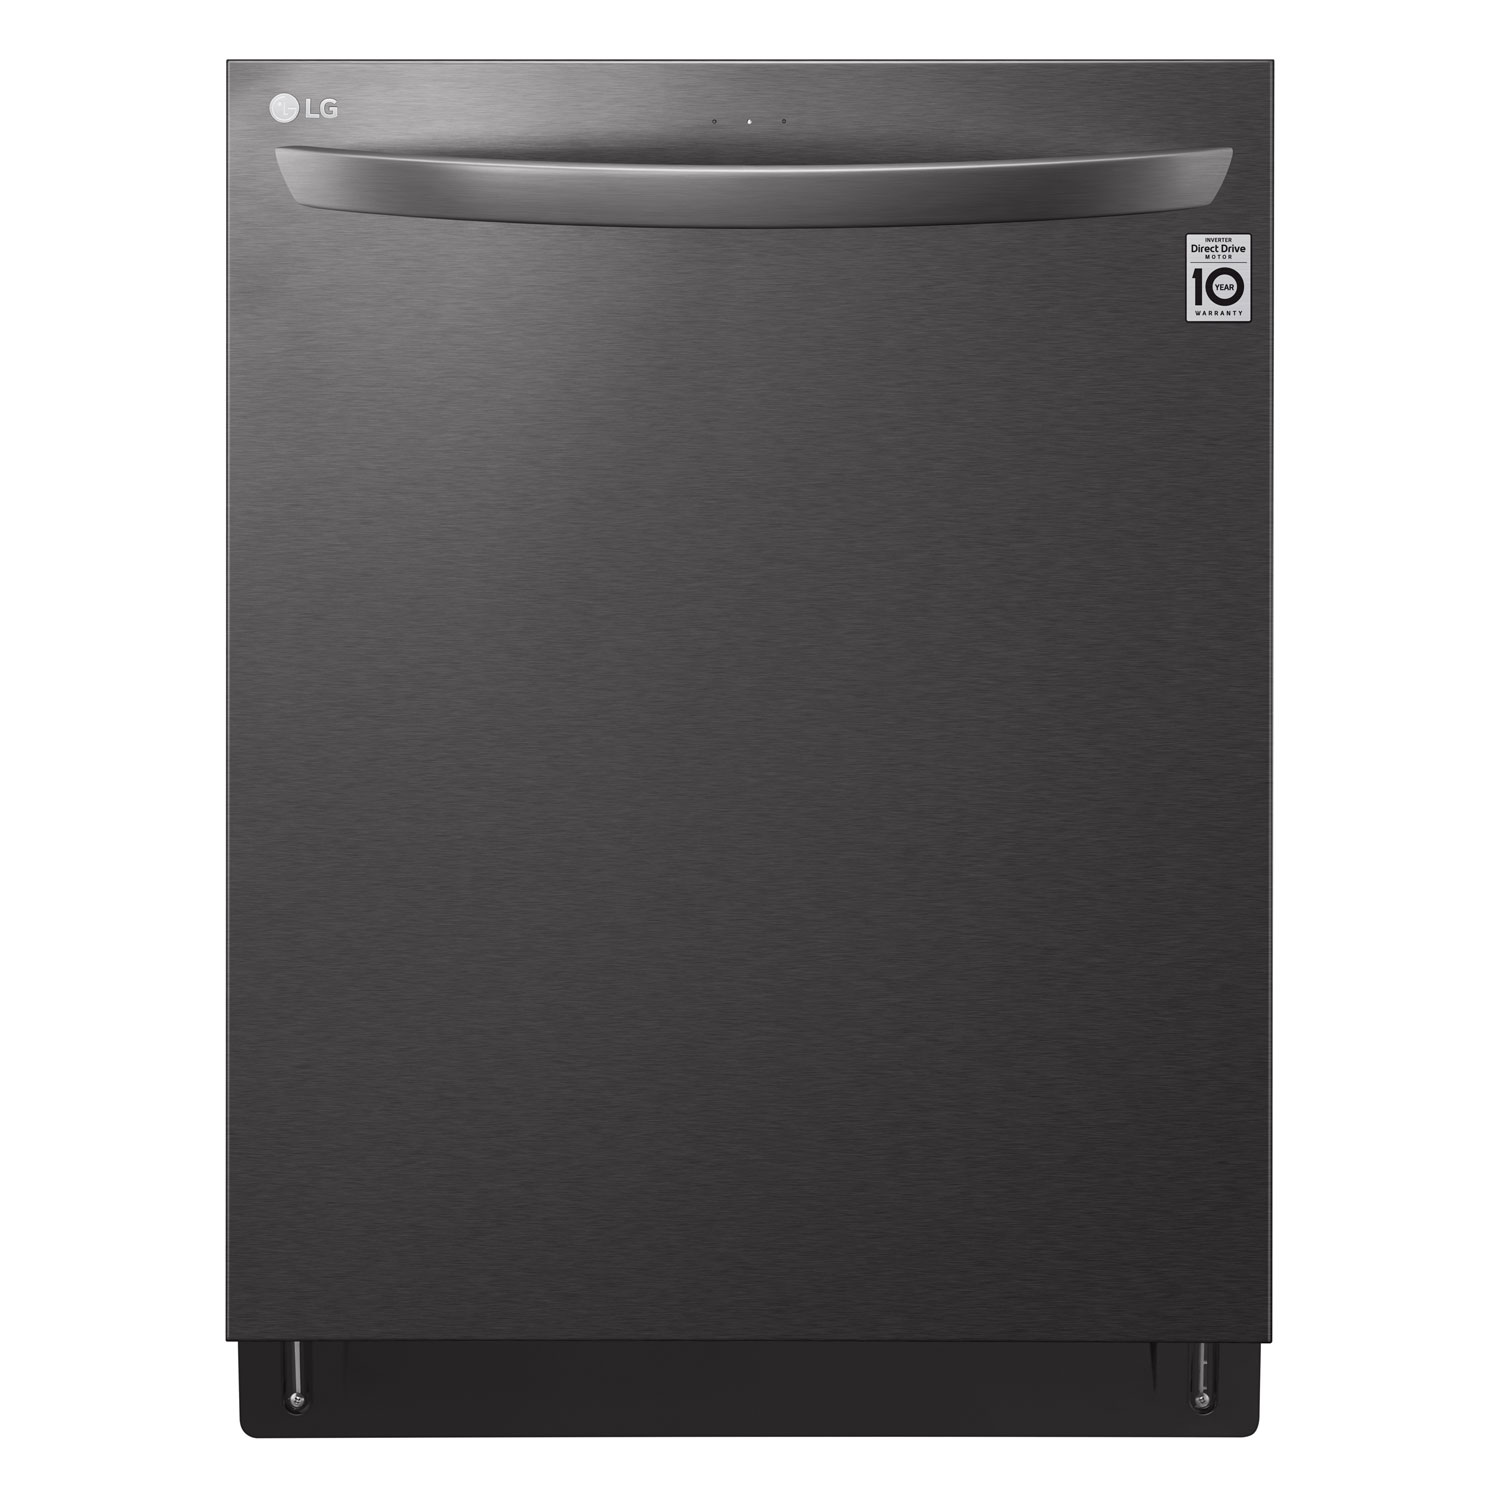 LG 24" 46dB Built-In Dishwasher with Third Rack (LDTS5552D) - Black Stainless Steel